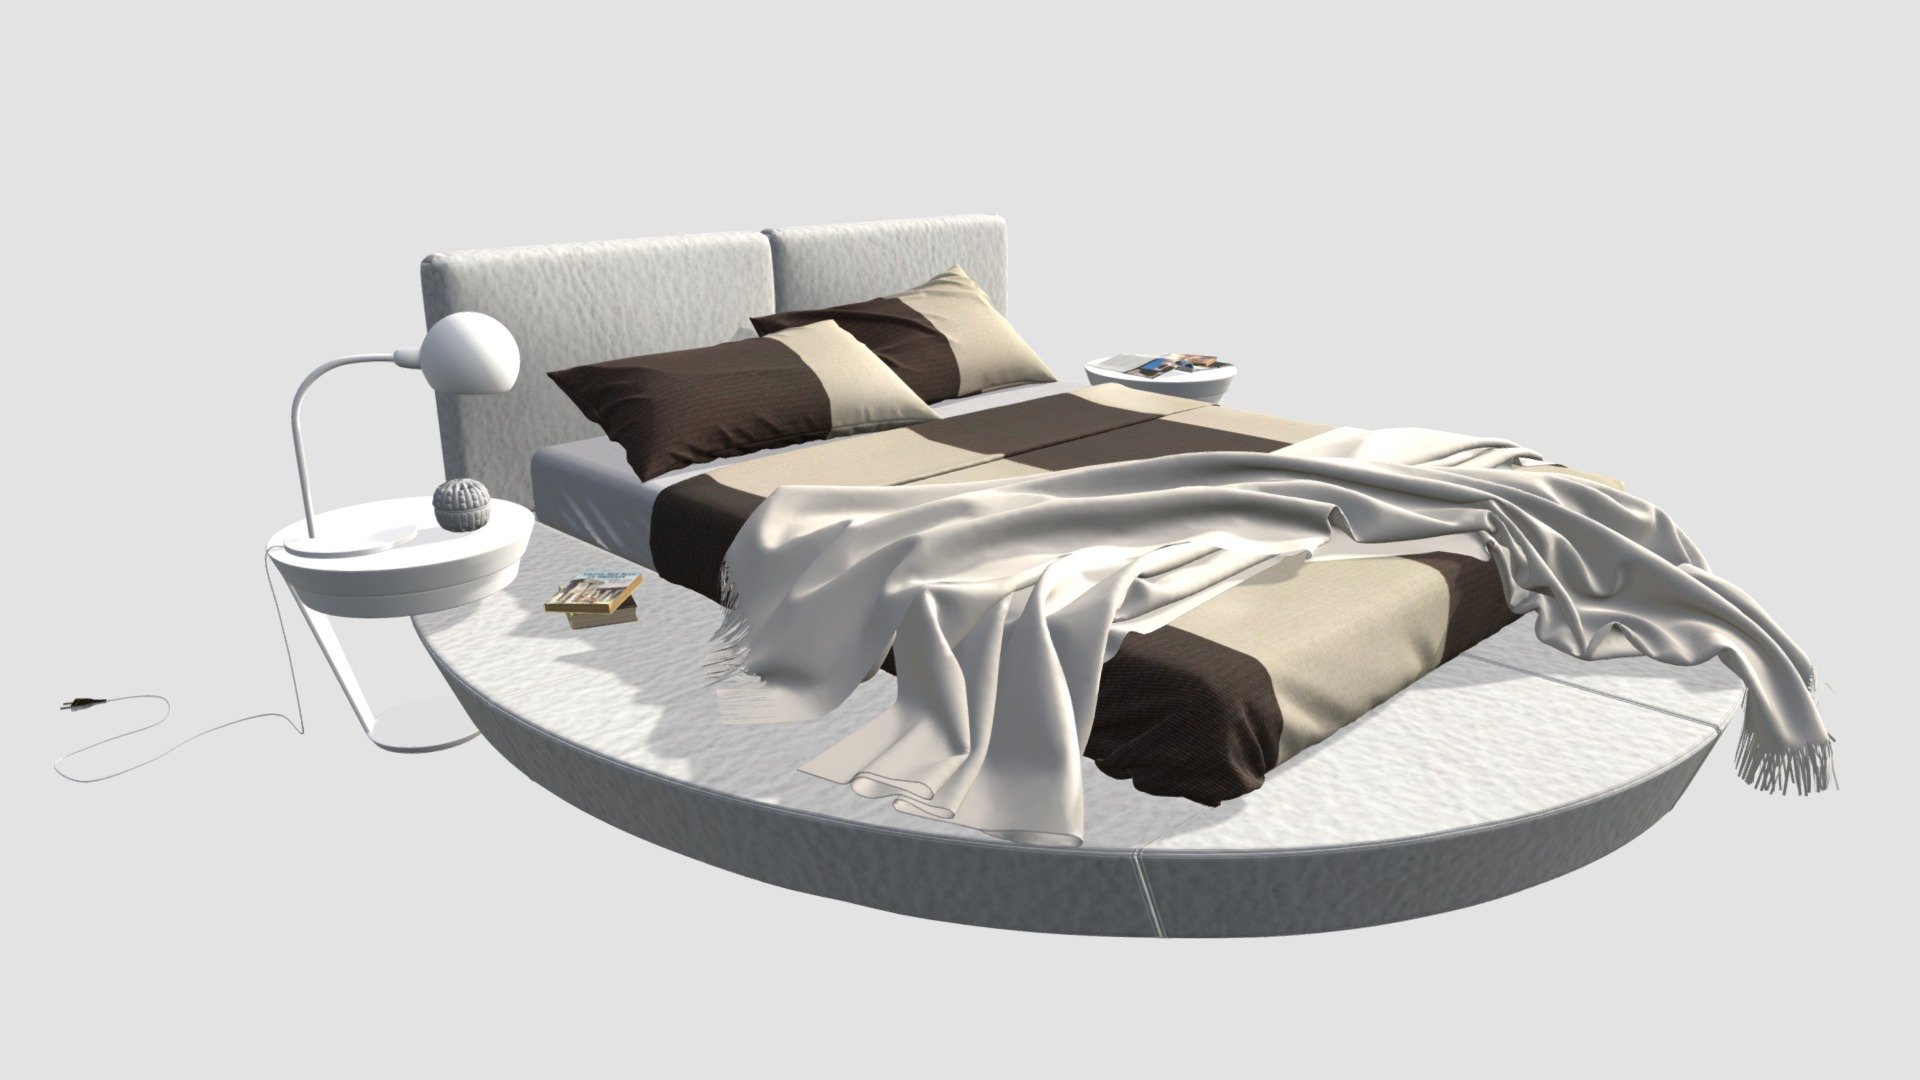 Highly detailed 3d model of modern bedroom set with all textures, shaders and materials. It is ready to use, just put it into your scene 3d model